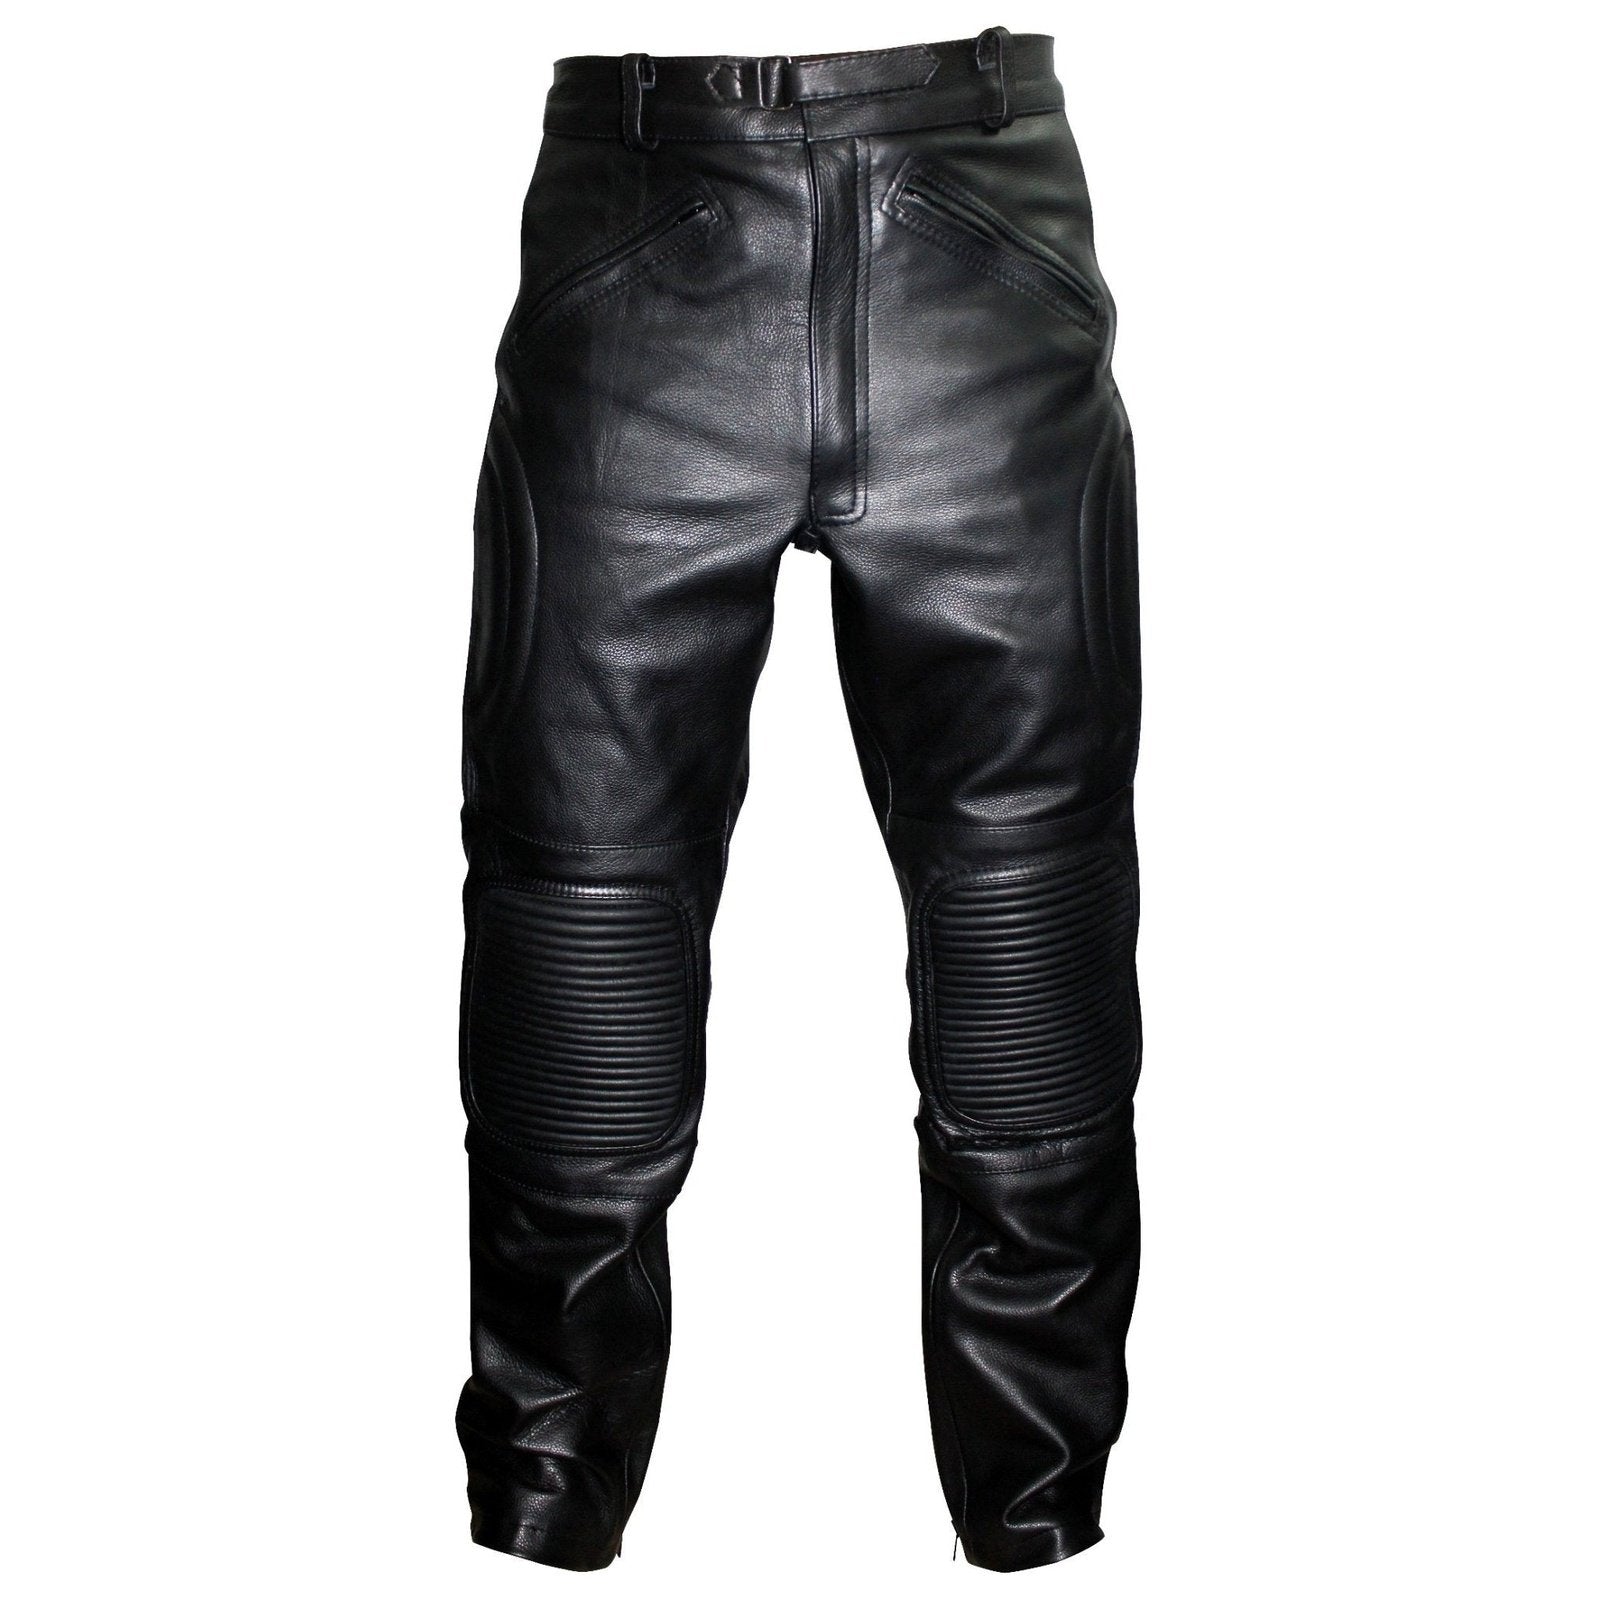 Limo Padded Biker Motorcycle Leather Trousers Pants – Vintage Leather